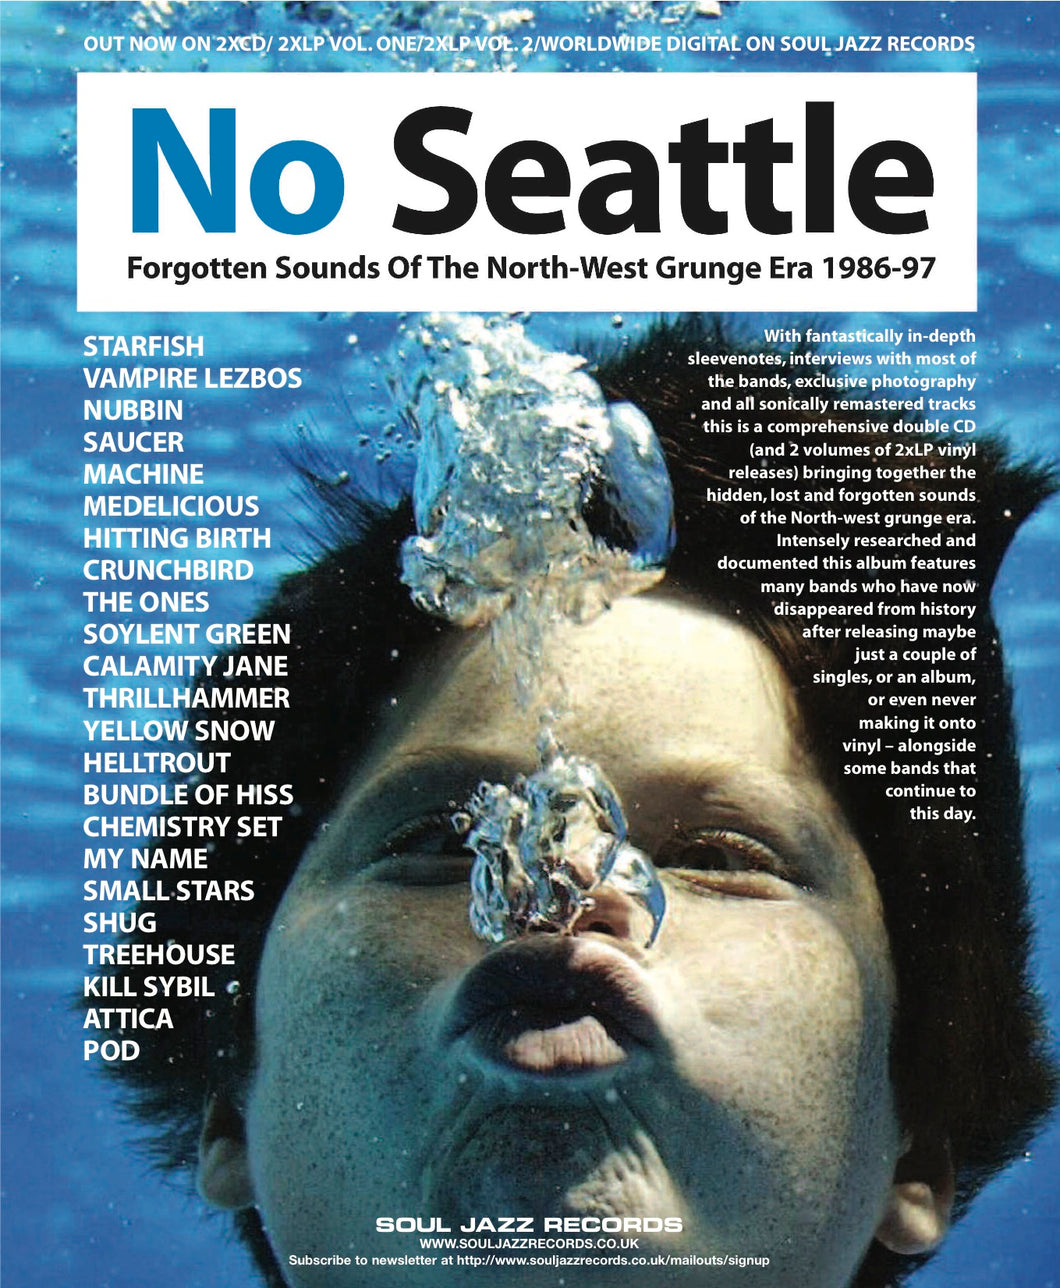 No Seattle: Forgotten Sounds of the North West Grunge Era 86-97